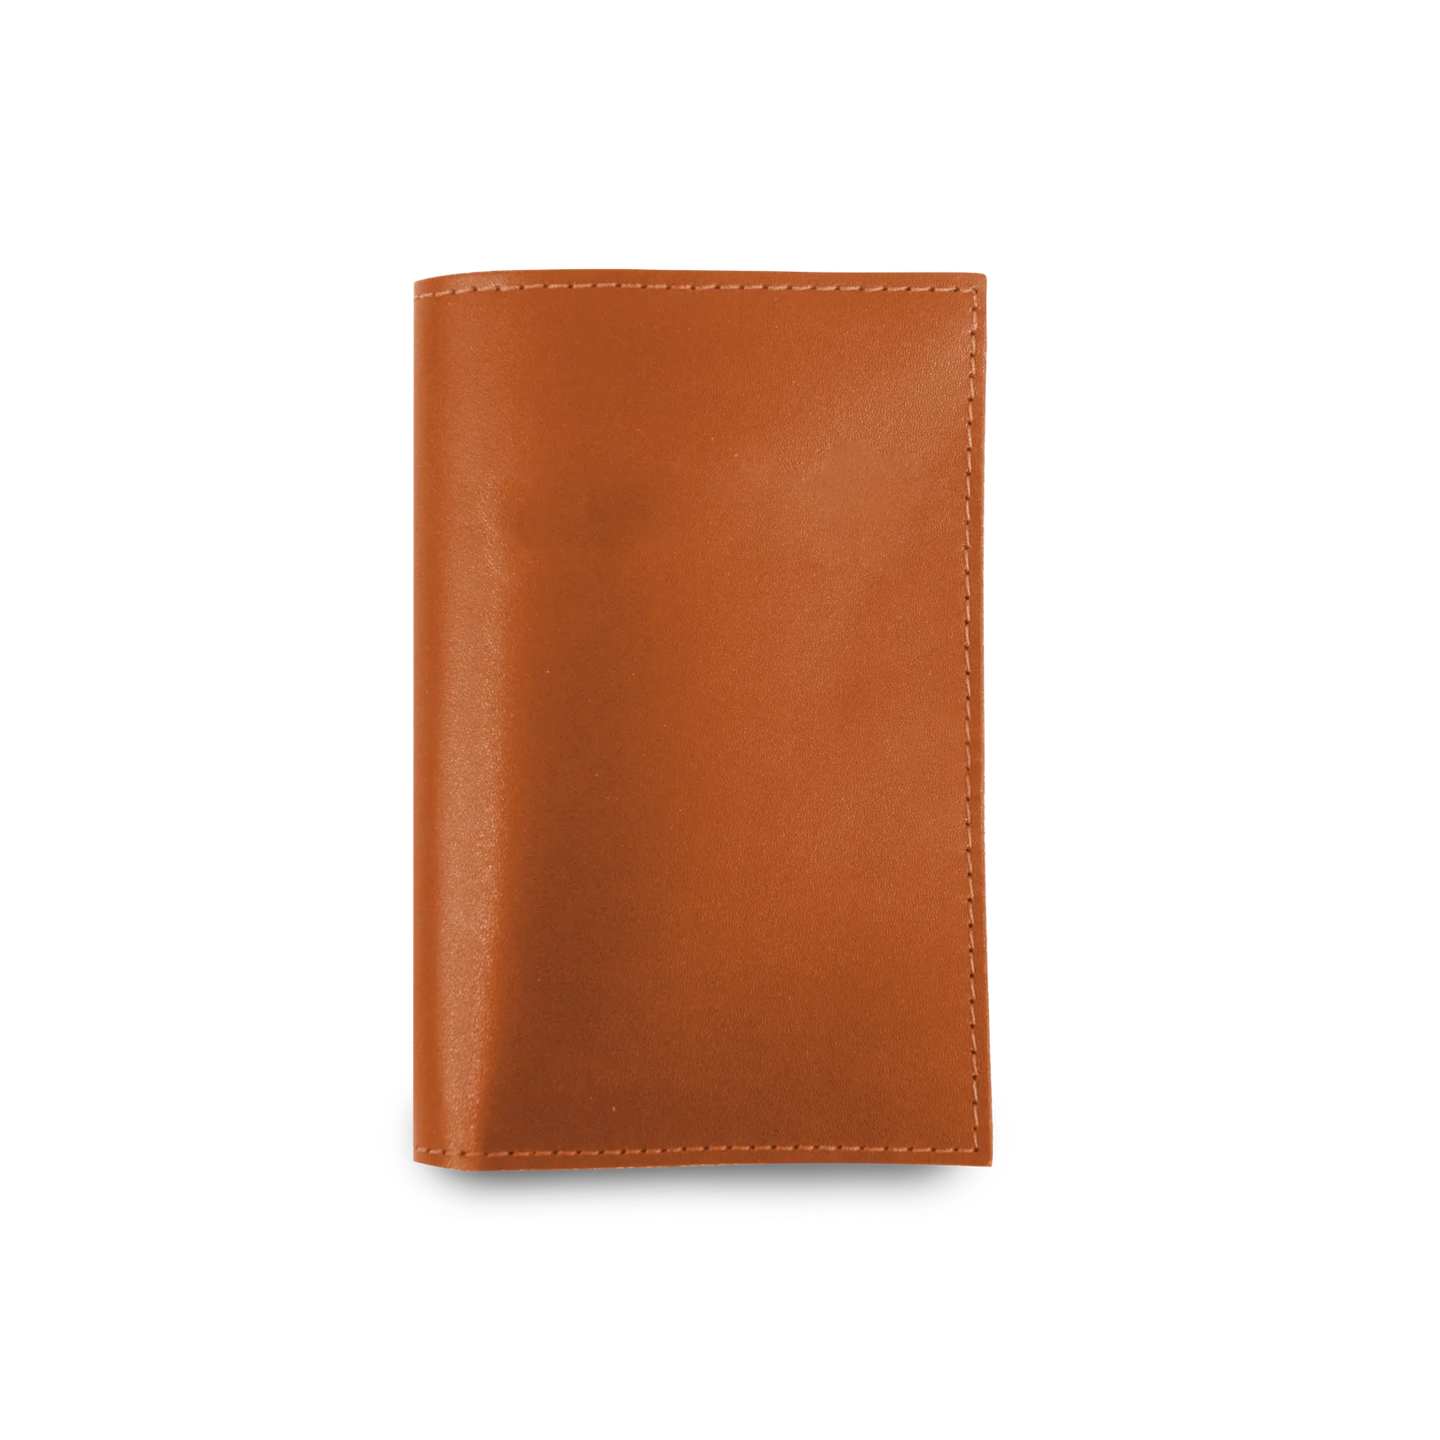 Passport Cover - Orange Leather Front Angle in Color 'Orange Leather'